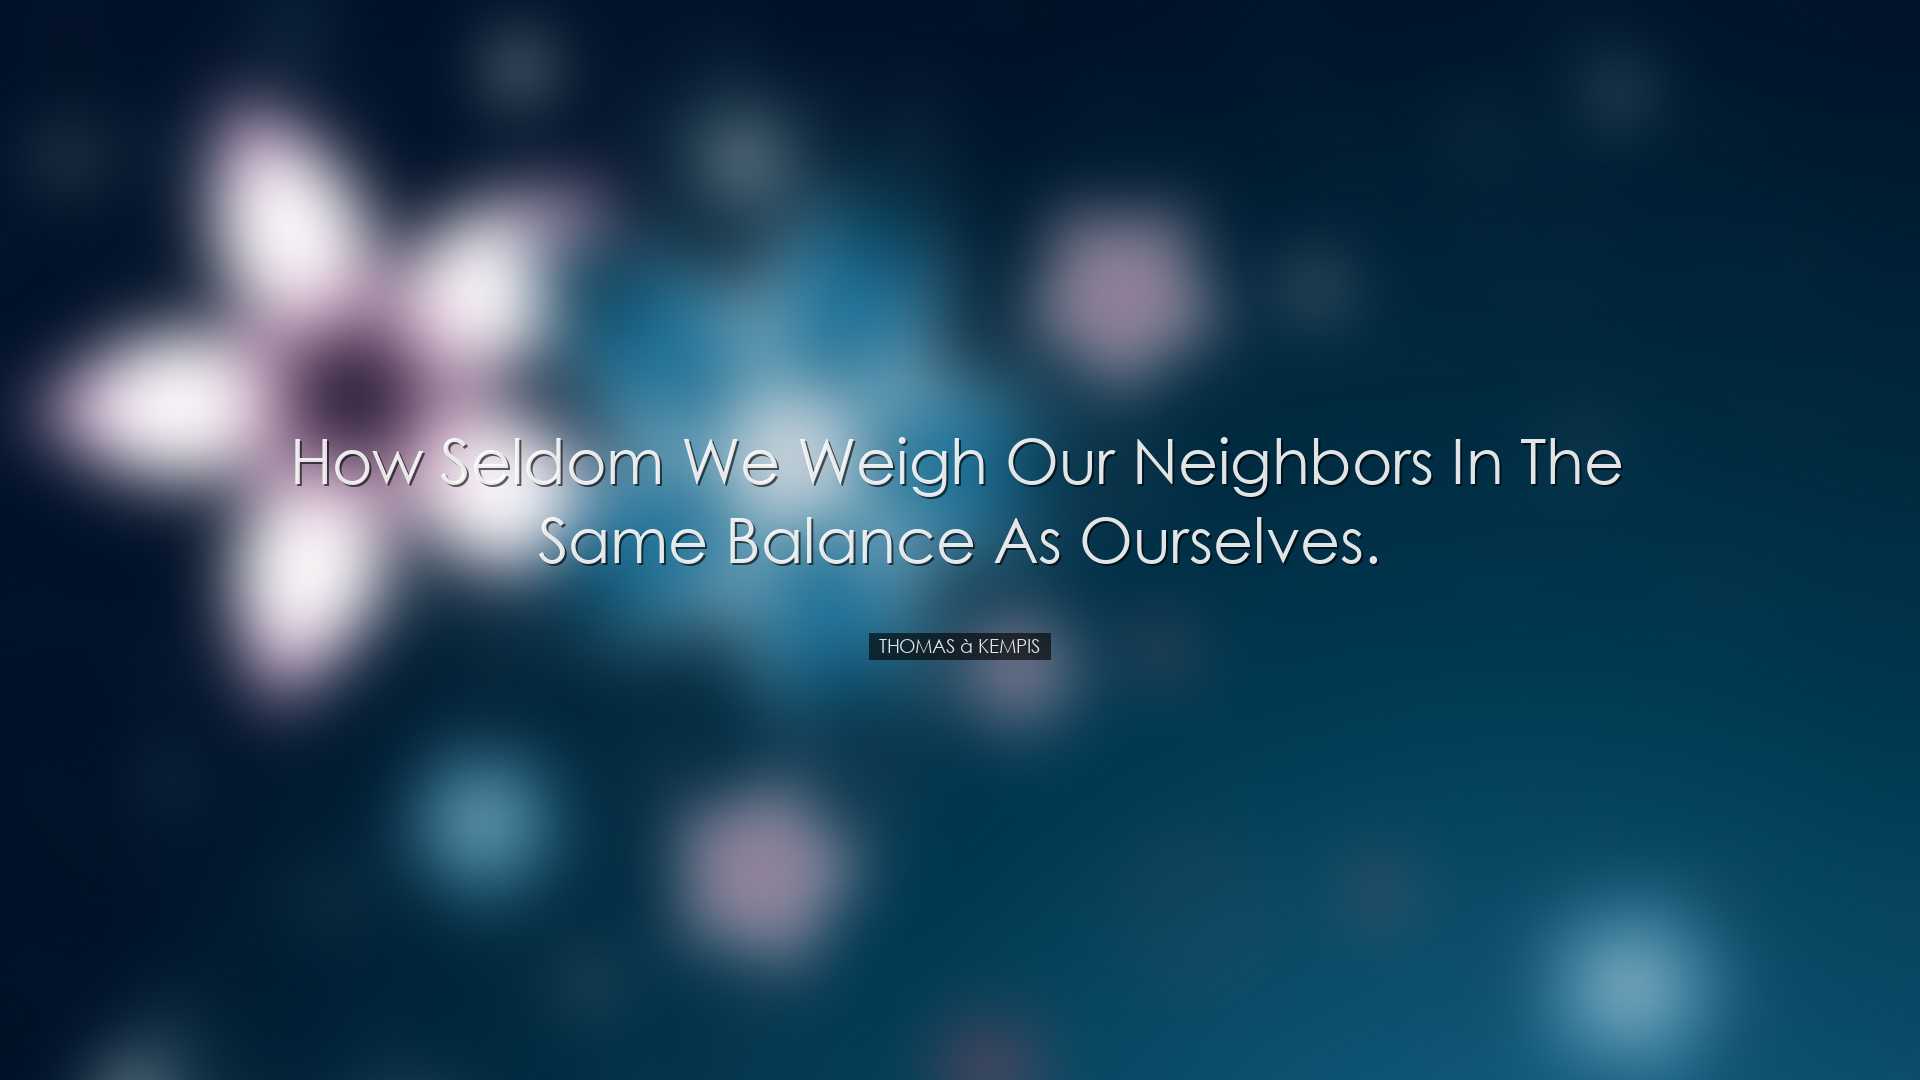 How seldom we weigh our neighbors in the same balance as ourselves